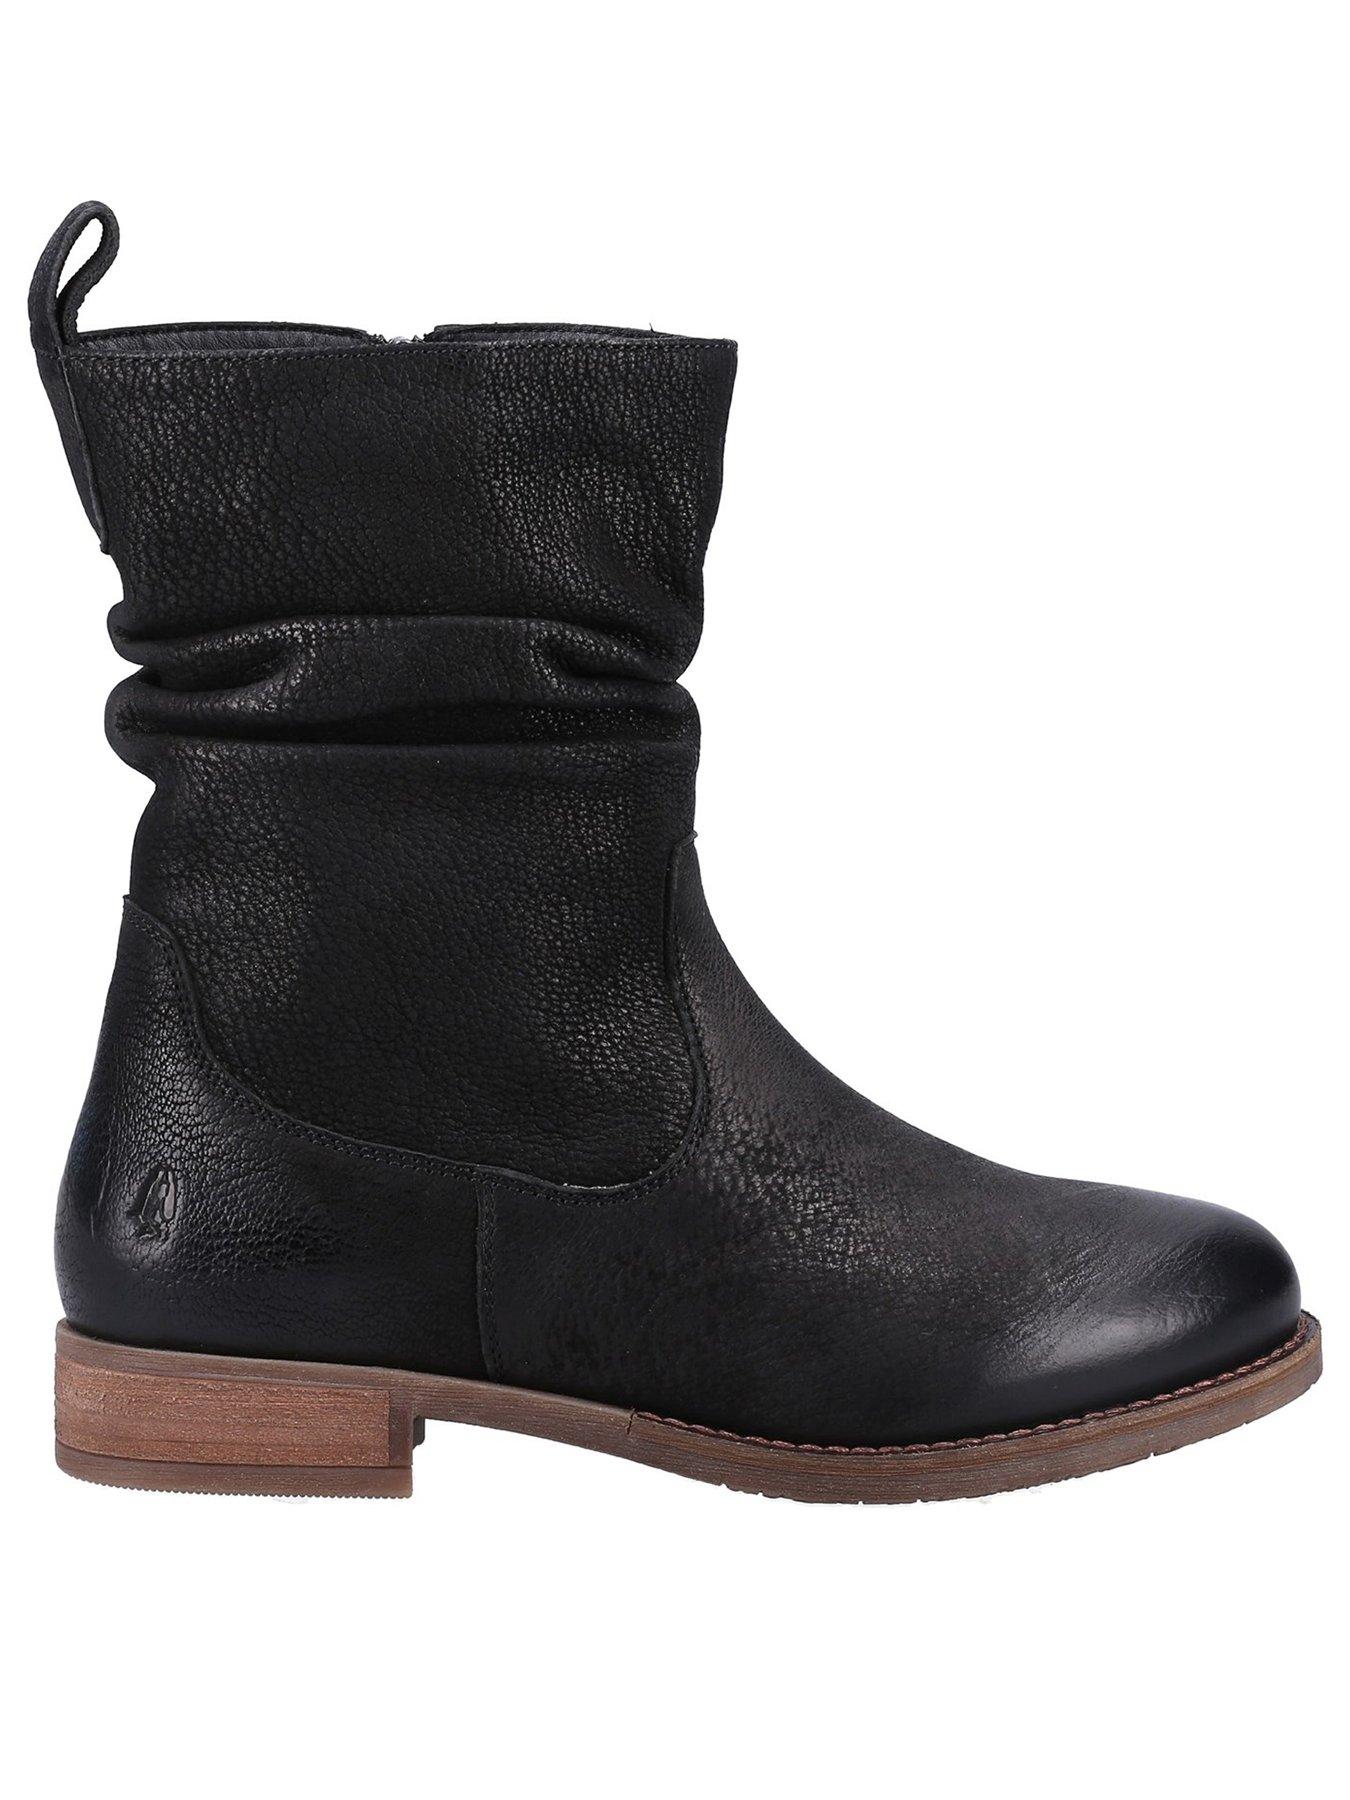 Hush Puppies Emilia Ruched Ankle Boot - Black